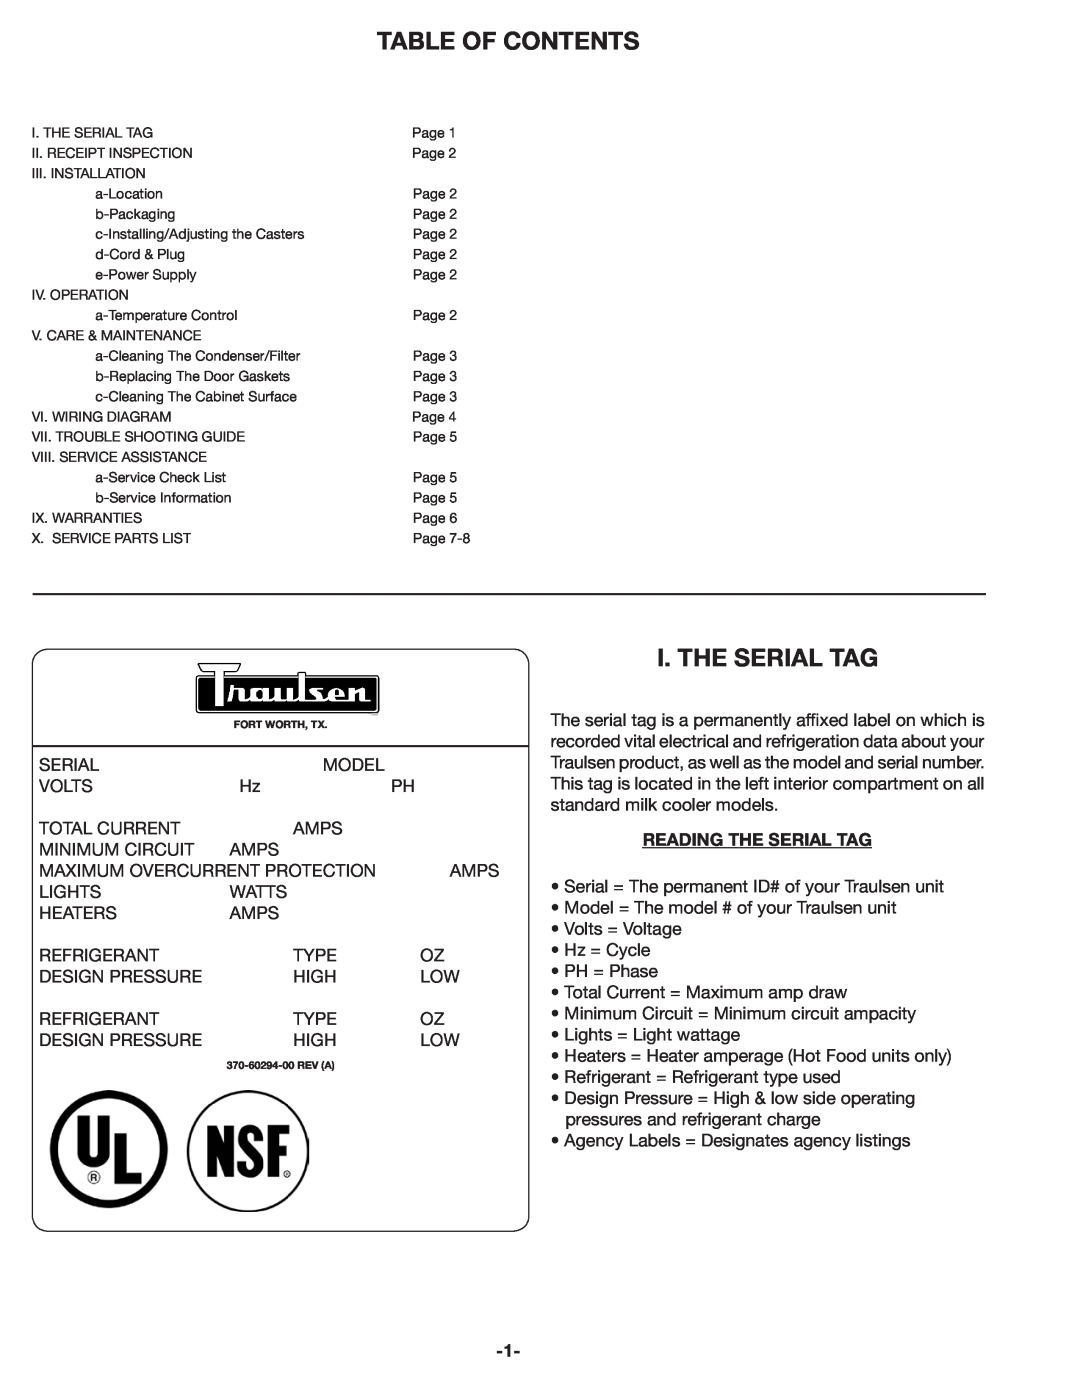 Traulsen RMC49, RMC34, RMC58 owner manual Table Of Contents, I. The Serial Tag, Reading The Serial Tag 